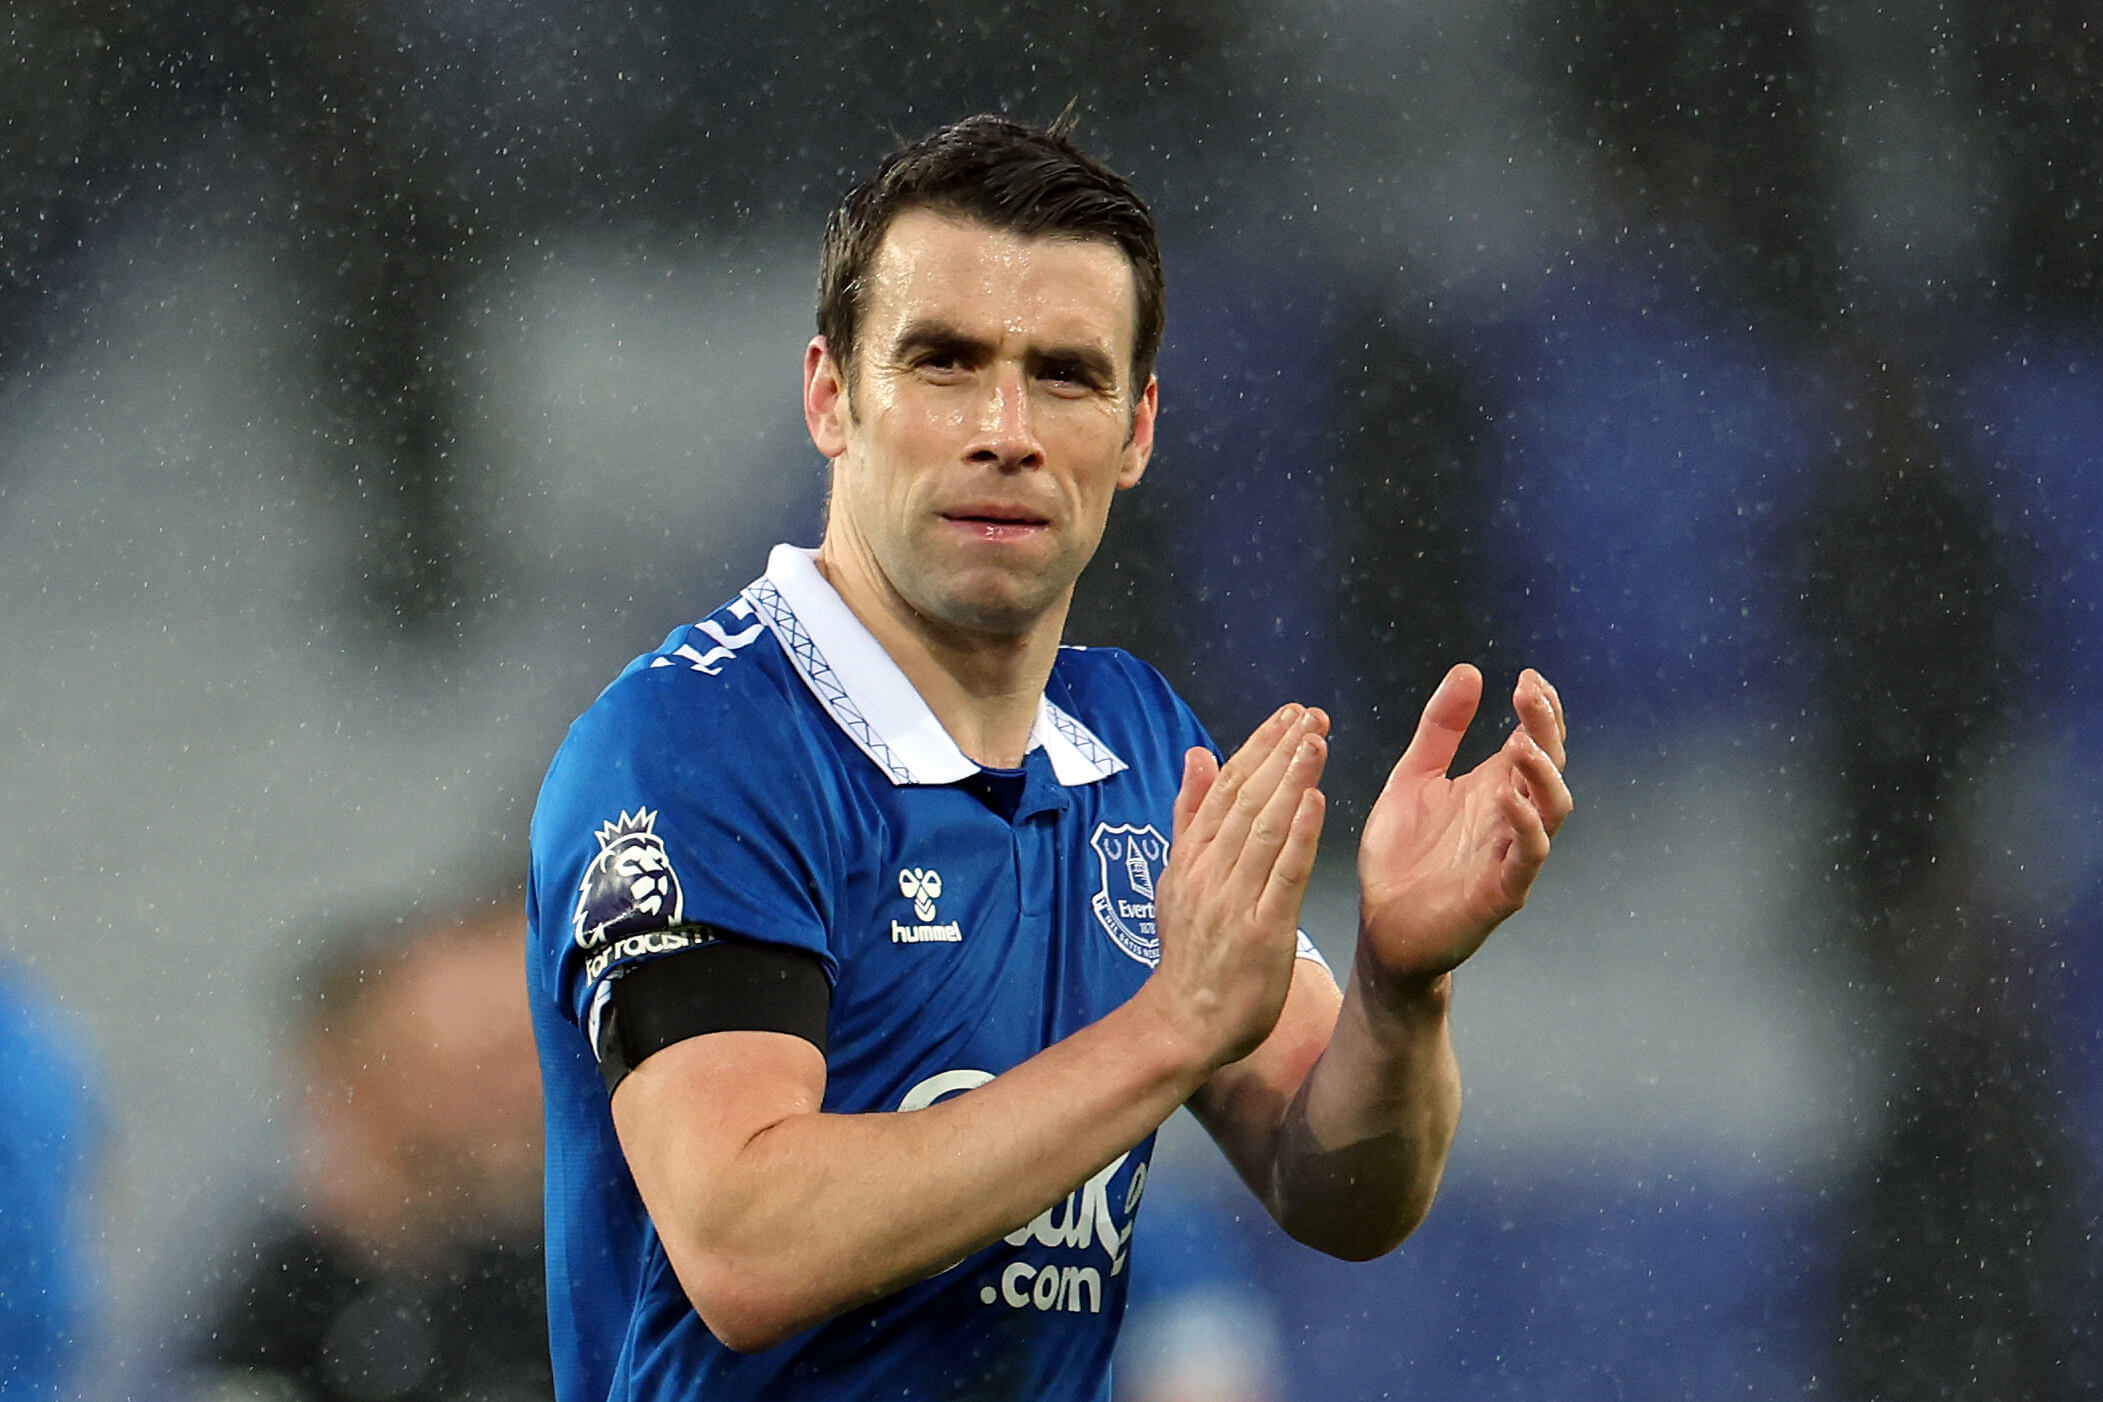 Breaking news: Everton captain Seamus Coleman announces his departure after rejecting an extension due to…